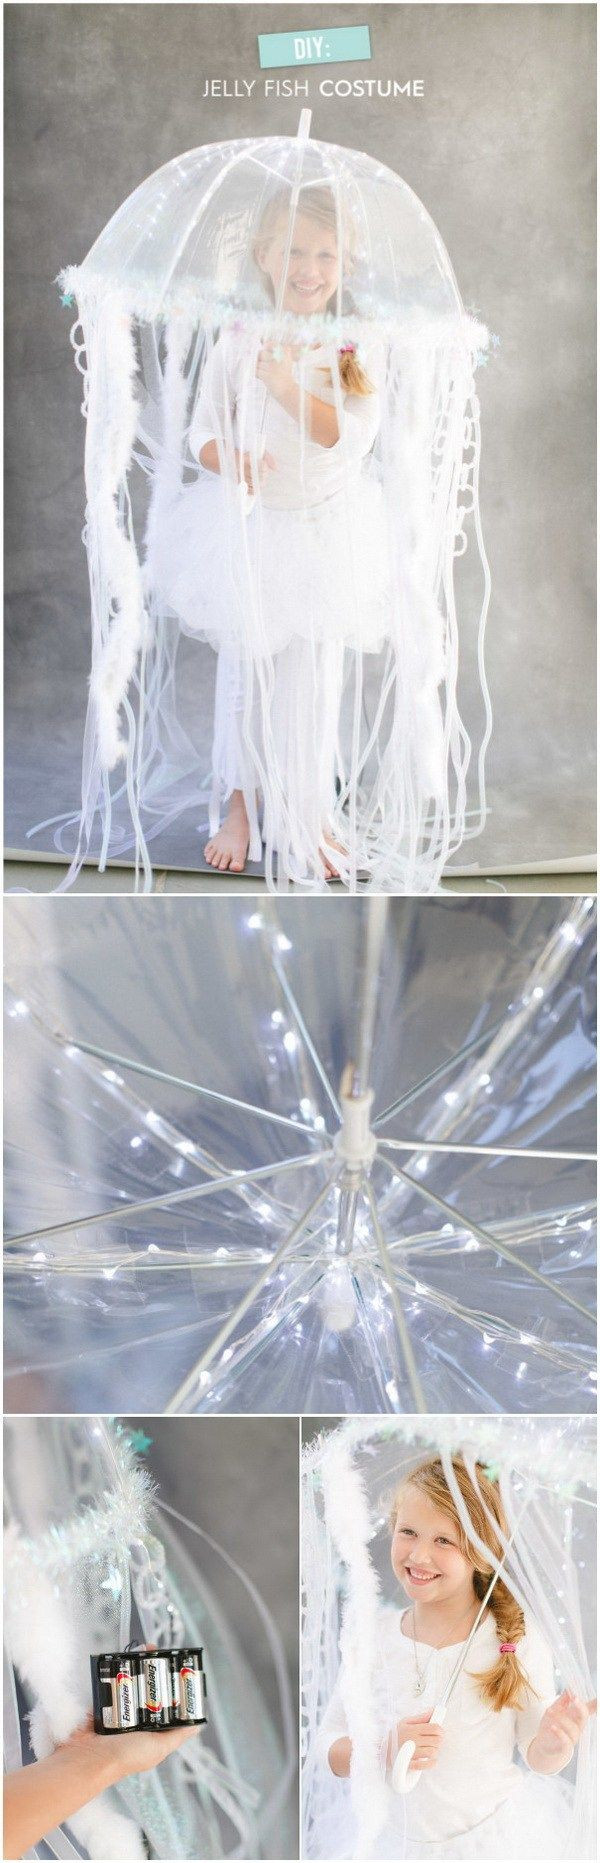 DIY Jellyfish Costume
 25 best ideas about Jelly fish costume on Pinterest